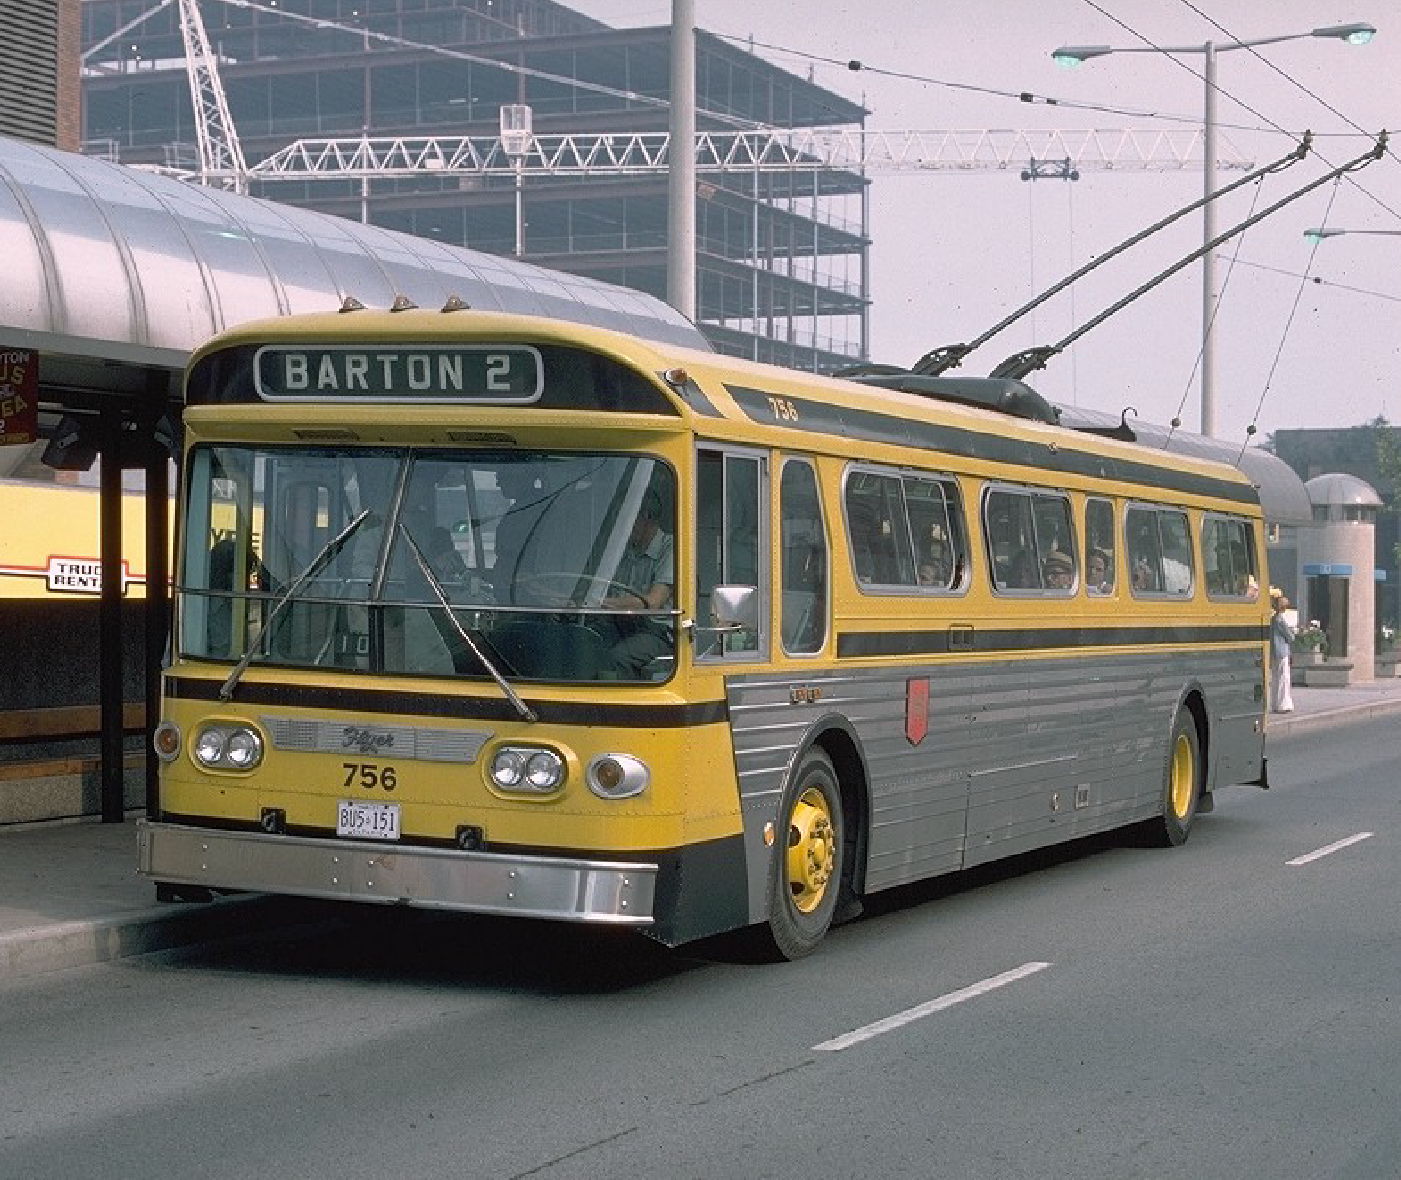 Historical photo of the number 2 Barton bus in yellow